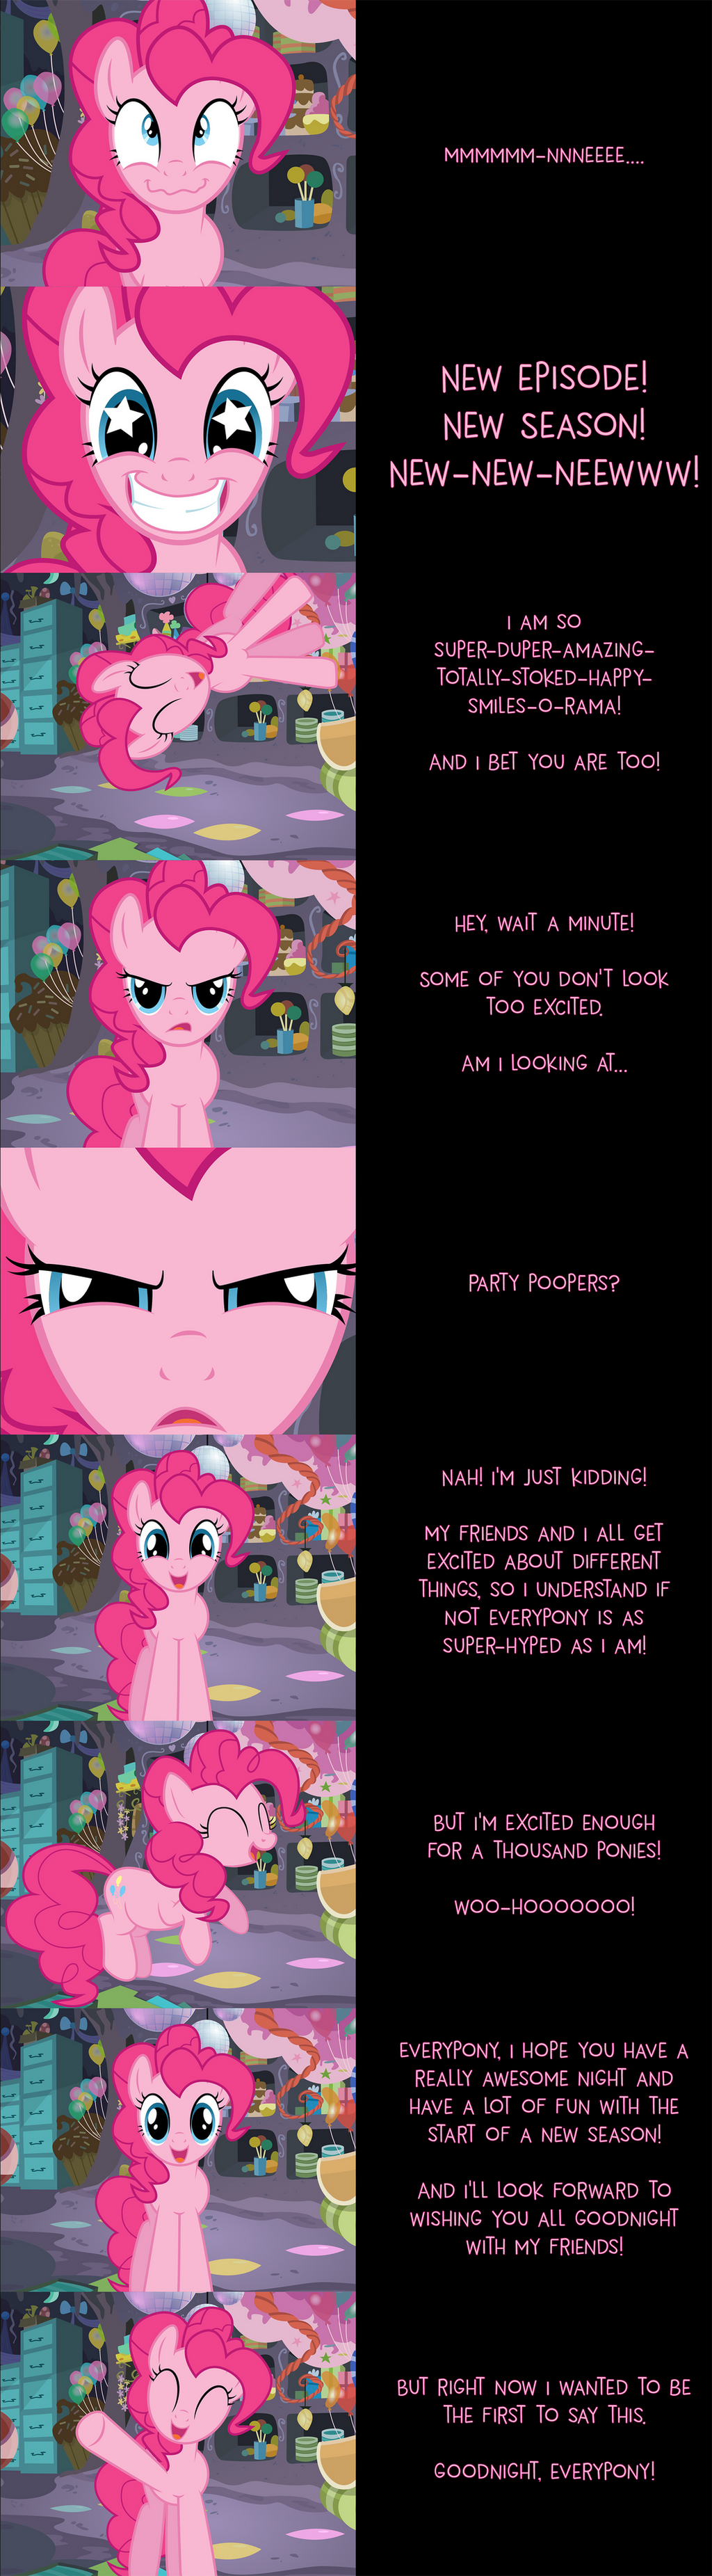 pinkie_pie_says_goodnight__excited_by_ml